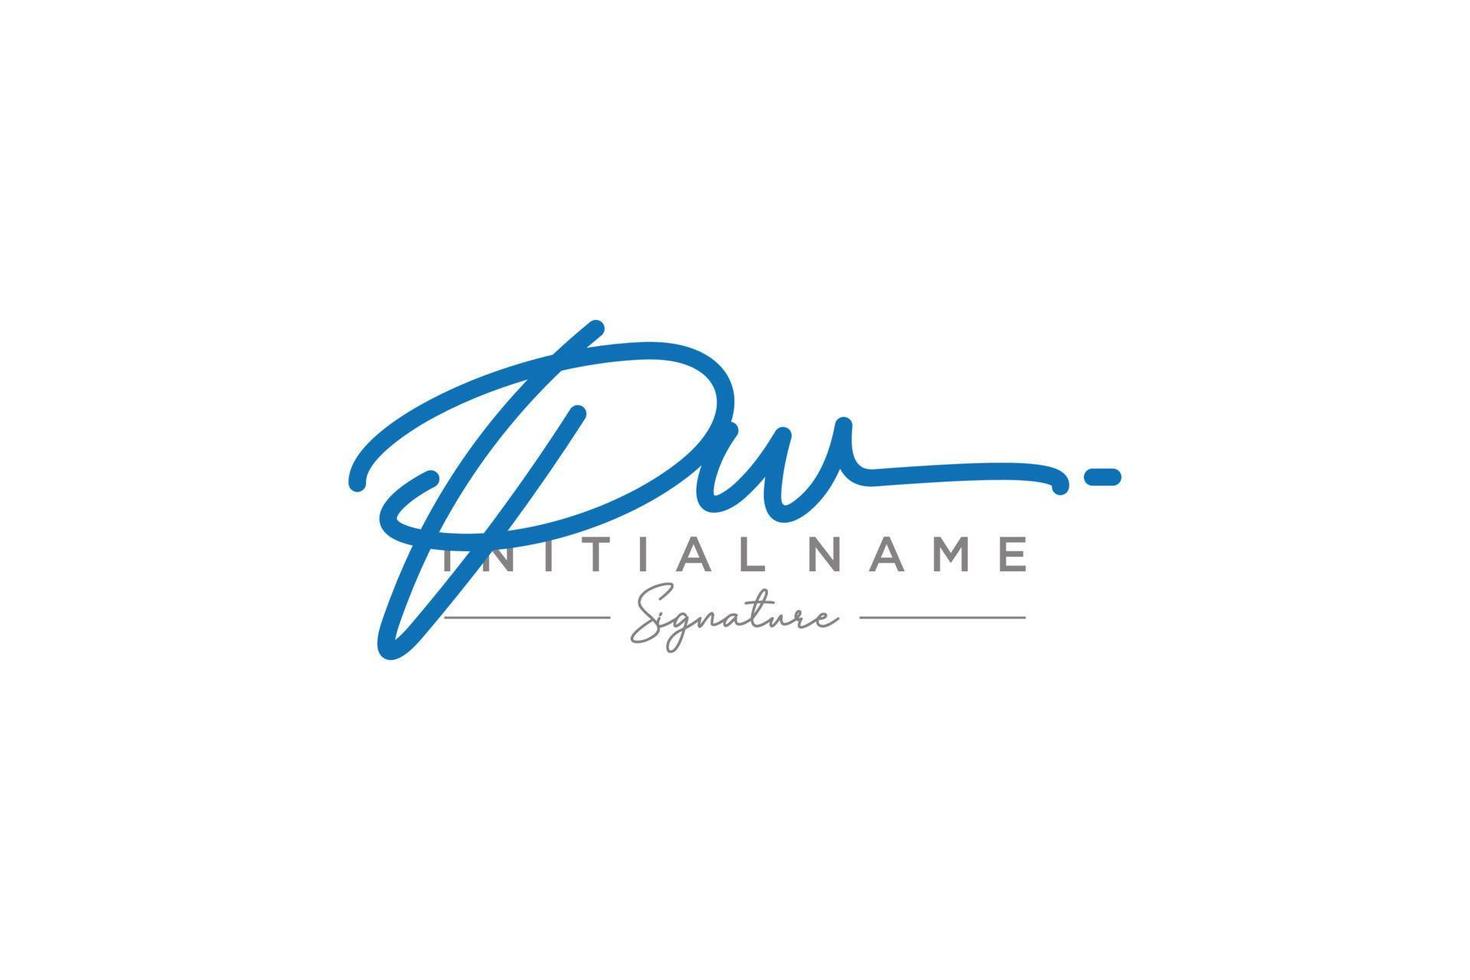 Initial PW signature logo template vector. Hand drawn Calligraphy lettering Vector illustration.